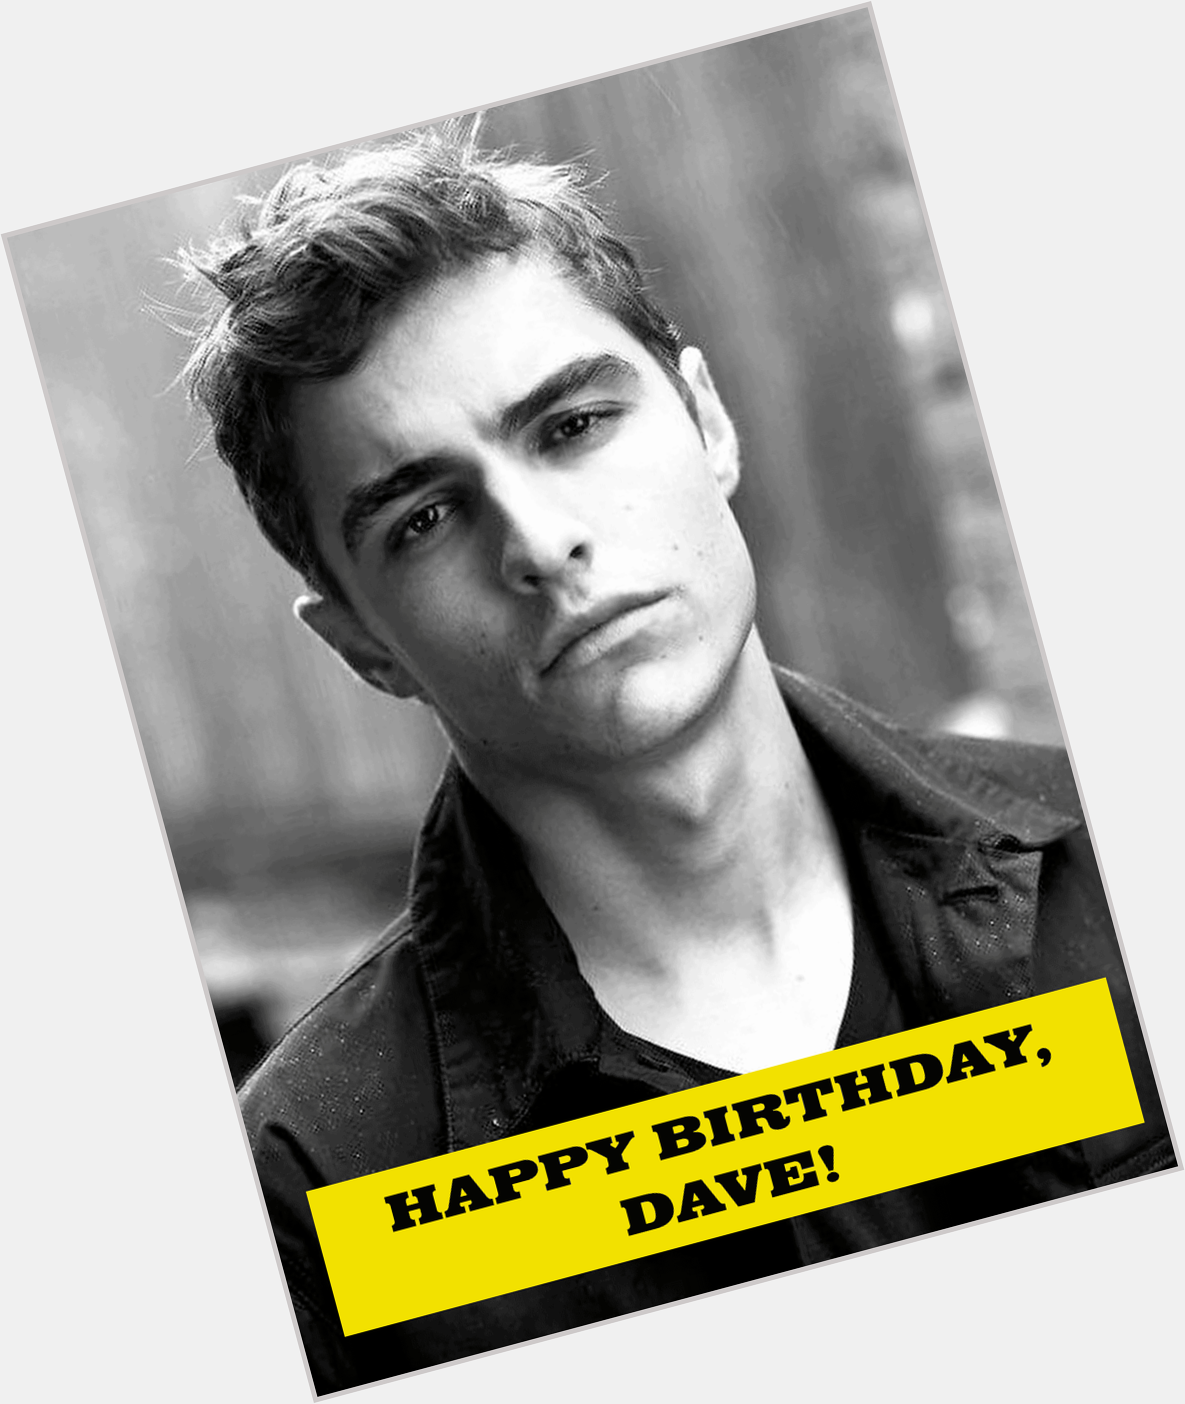 Movie Loft wishing Dave Franco, the younger of the Franco brothers, a Happy Birthday!  